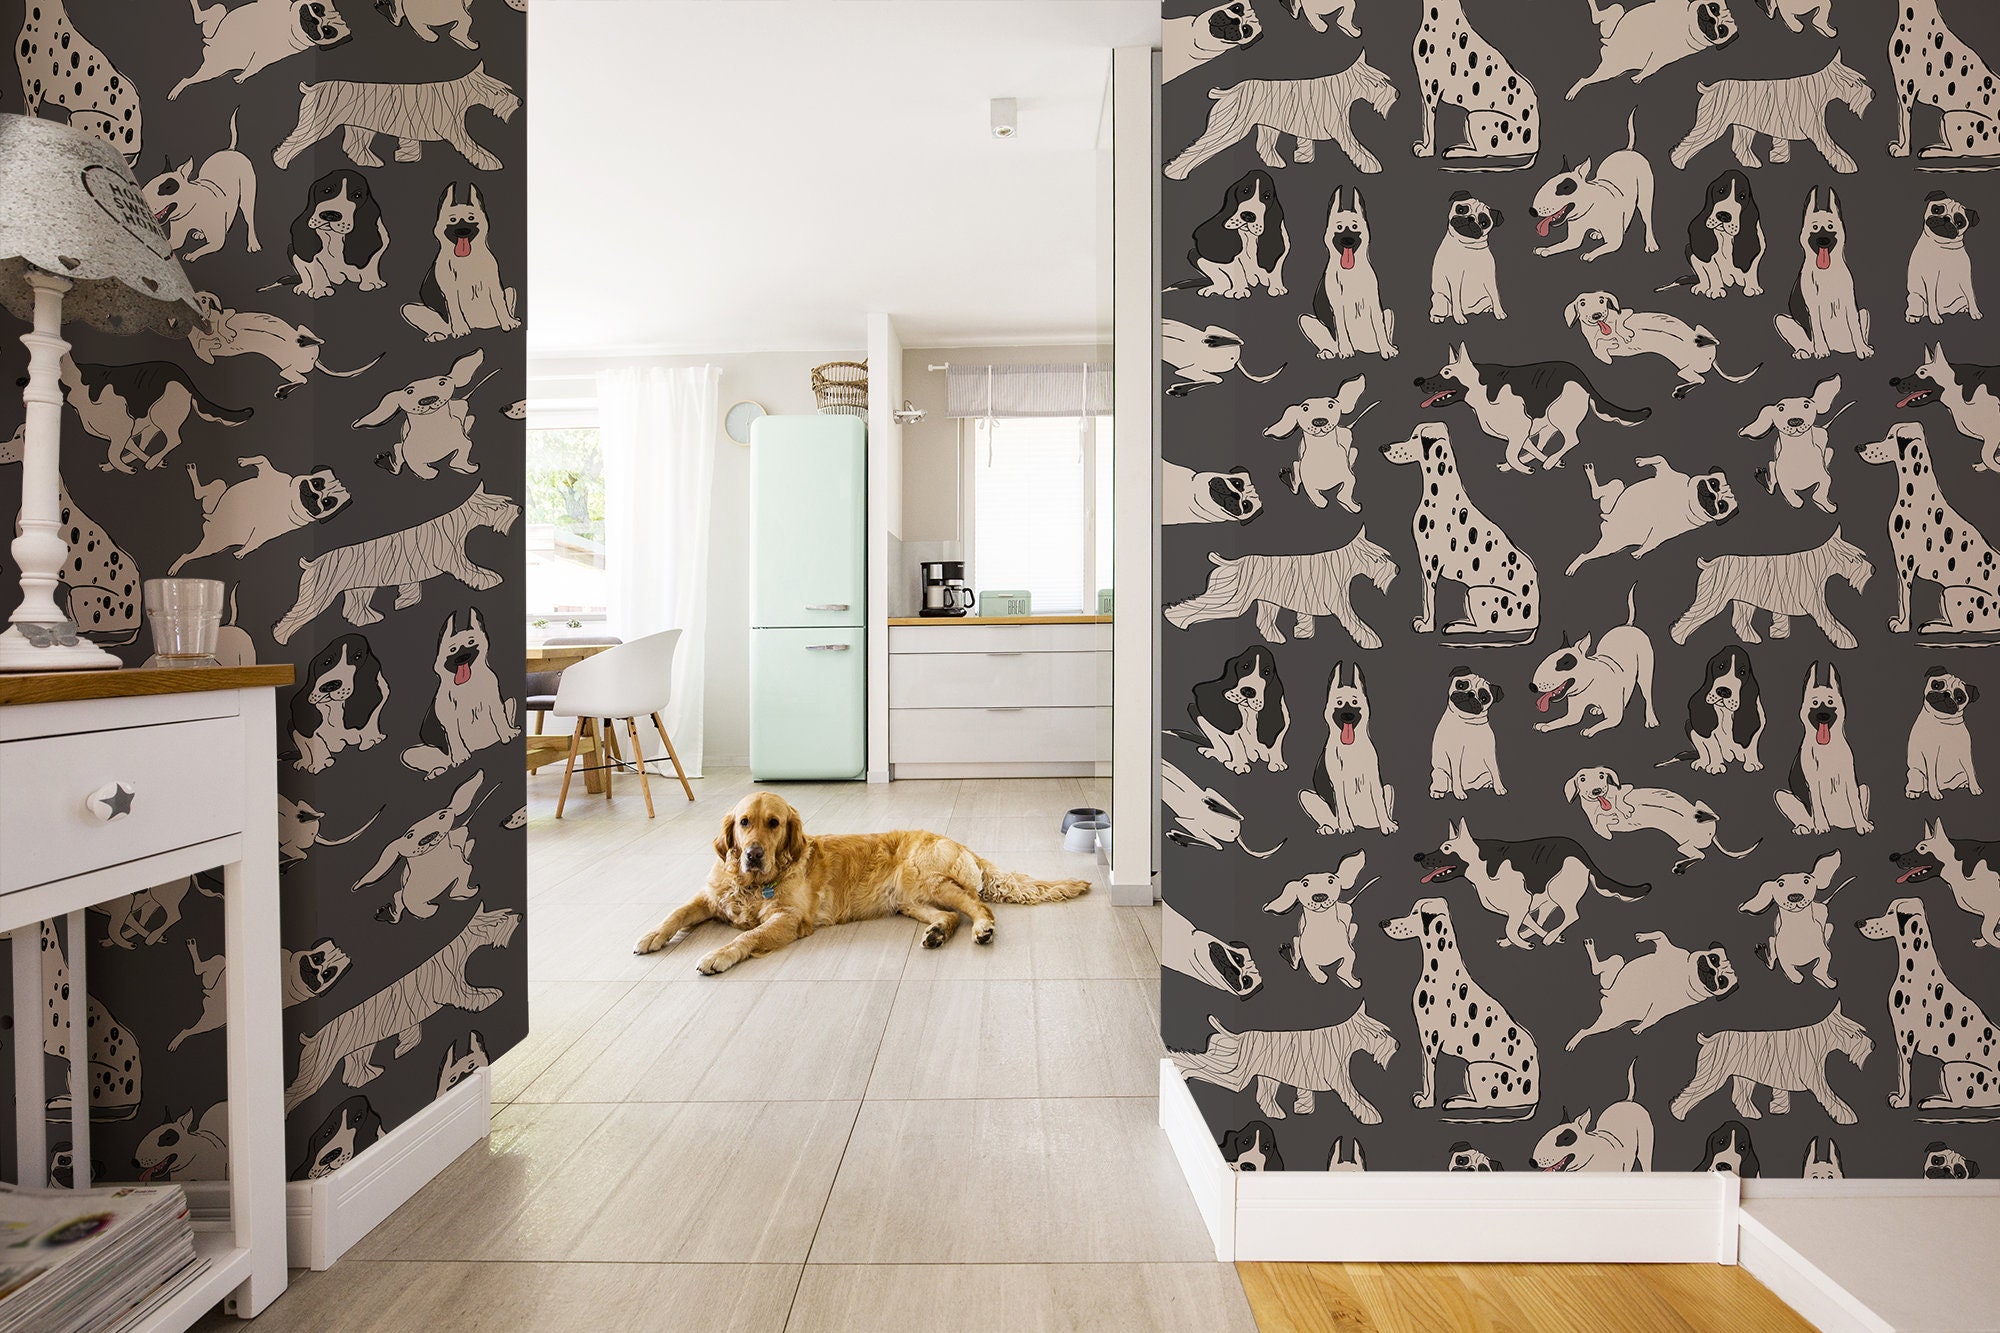 Buy Peel  Stick Wallpaper 9ft x 2ft  Patchwork Dogs Blue Yellow Floral  Animals Baby Girls Silhouette Custom Removable Wallpaper by Spoonflower  Online at Lowest Price in Ubuy Nepal B07Z3Y3SLQ